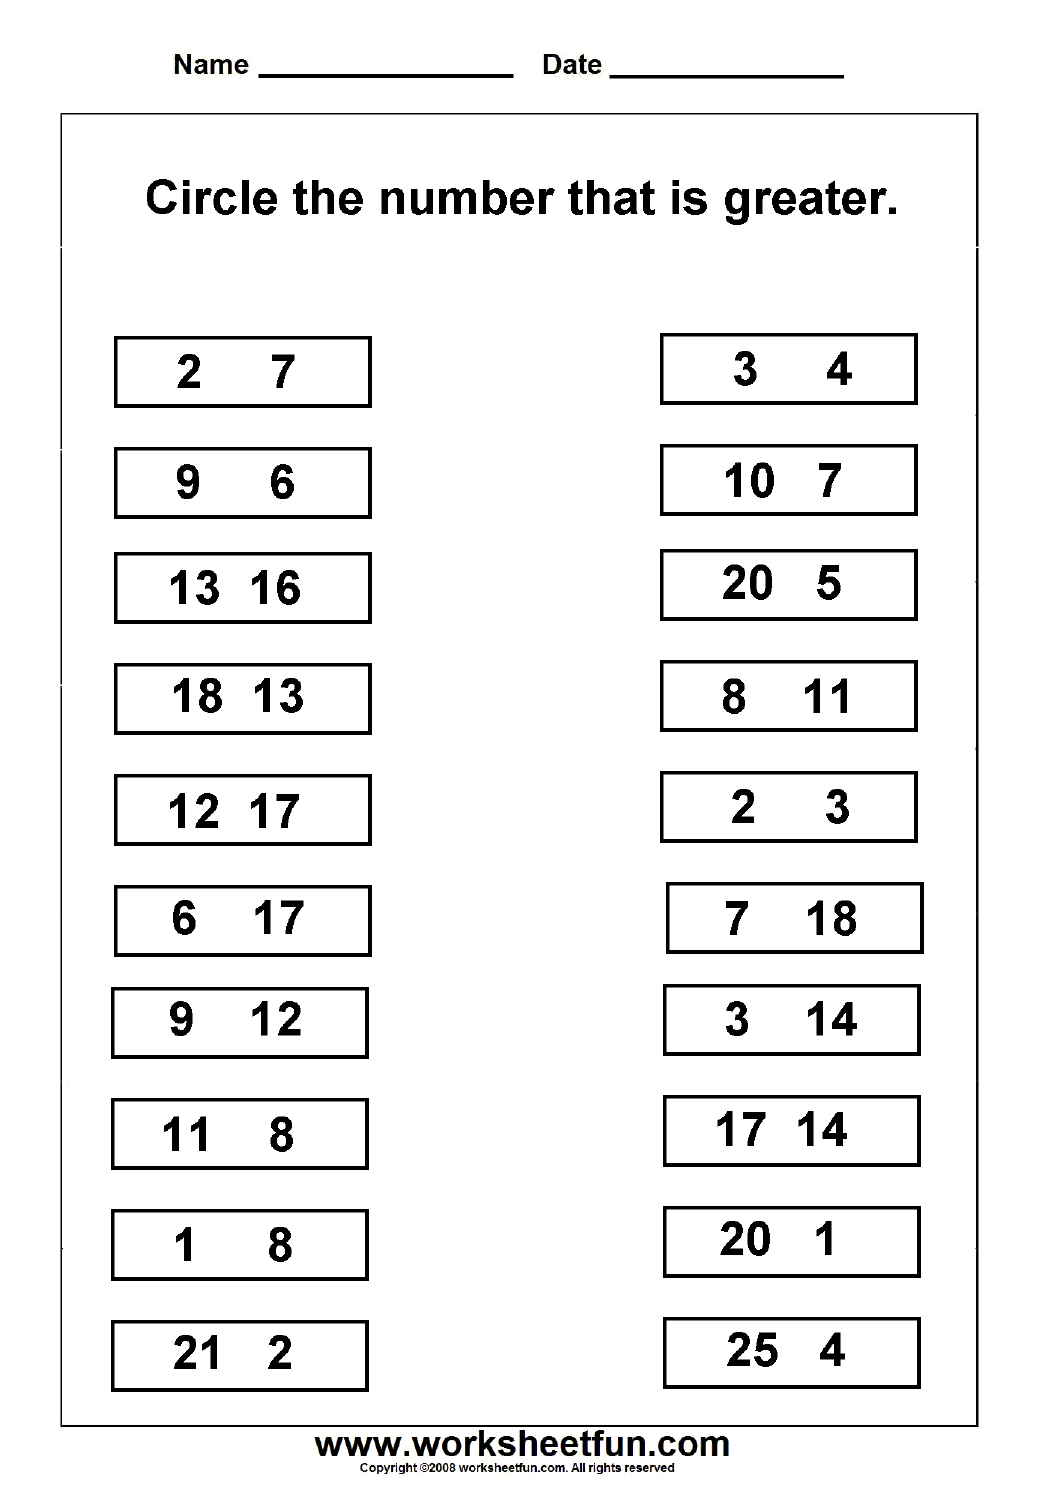 Odd & Even Numbers Worksheets Image